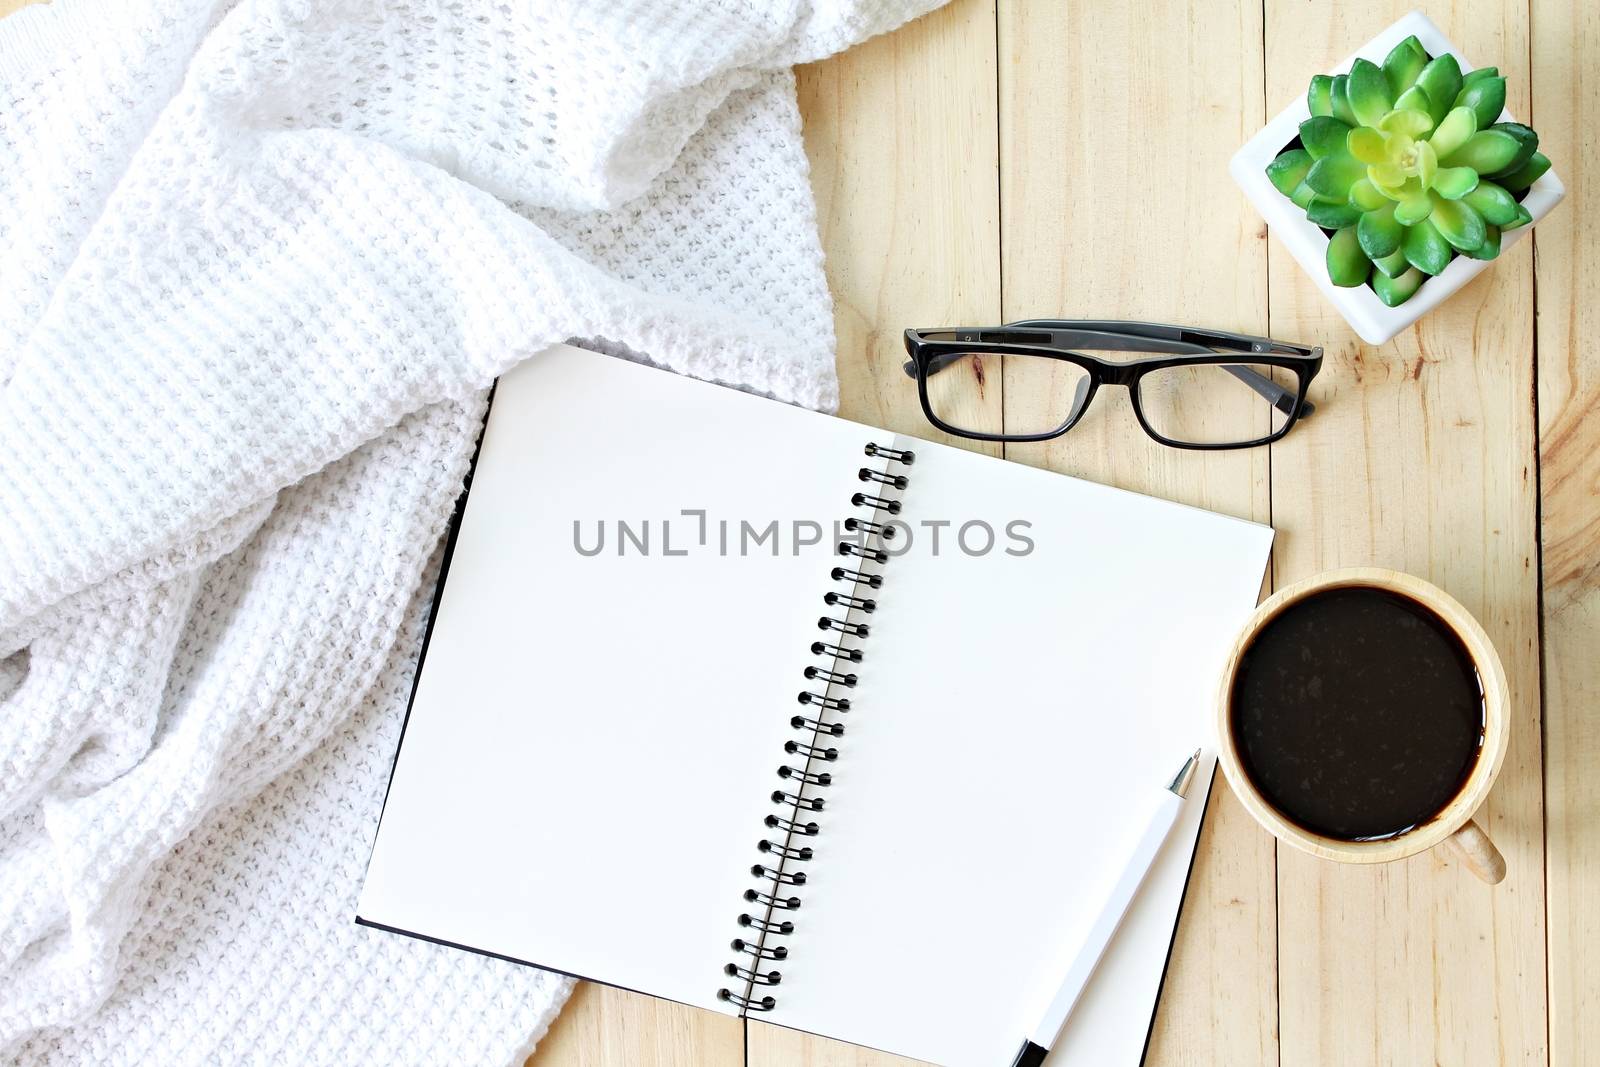 Business, Holiday, weekend or winter concept : Flat lay or top view of white knitted blanket, eyeglasses, cup of coffee and blank notebook paper on wooden background